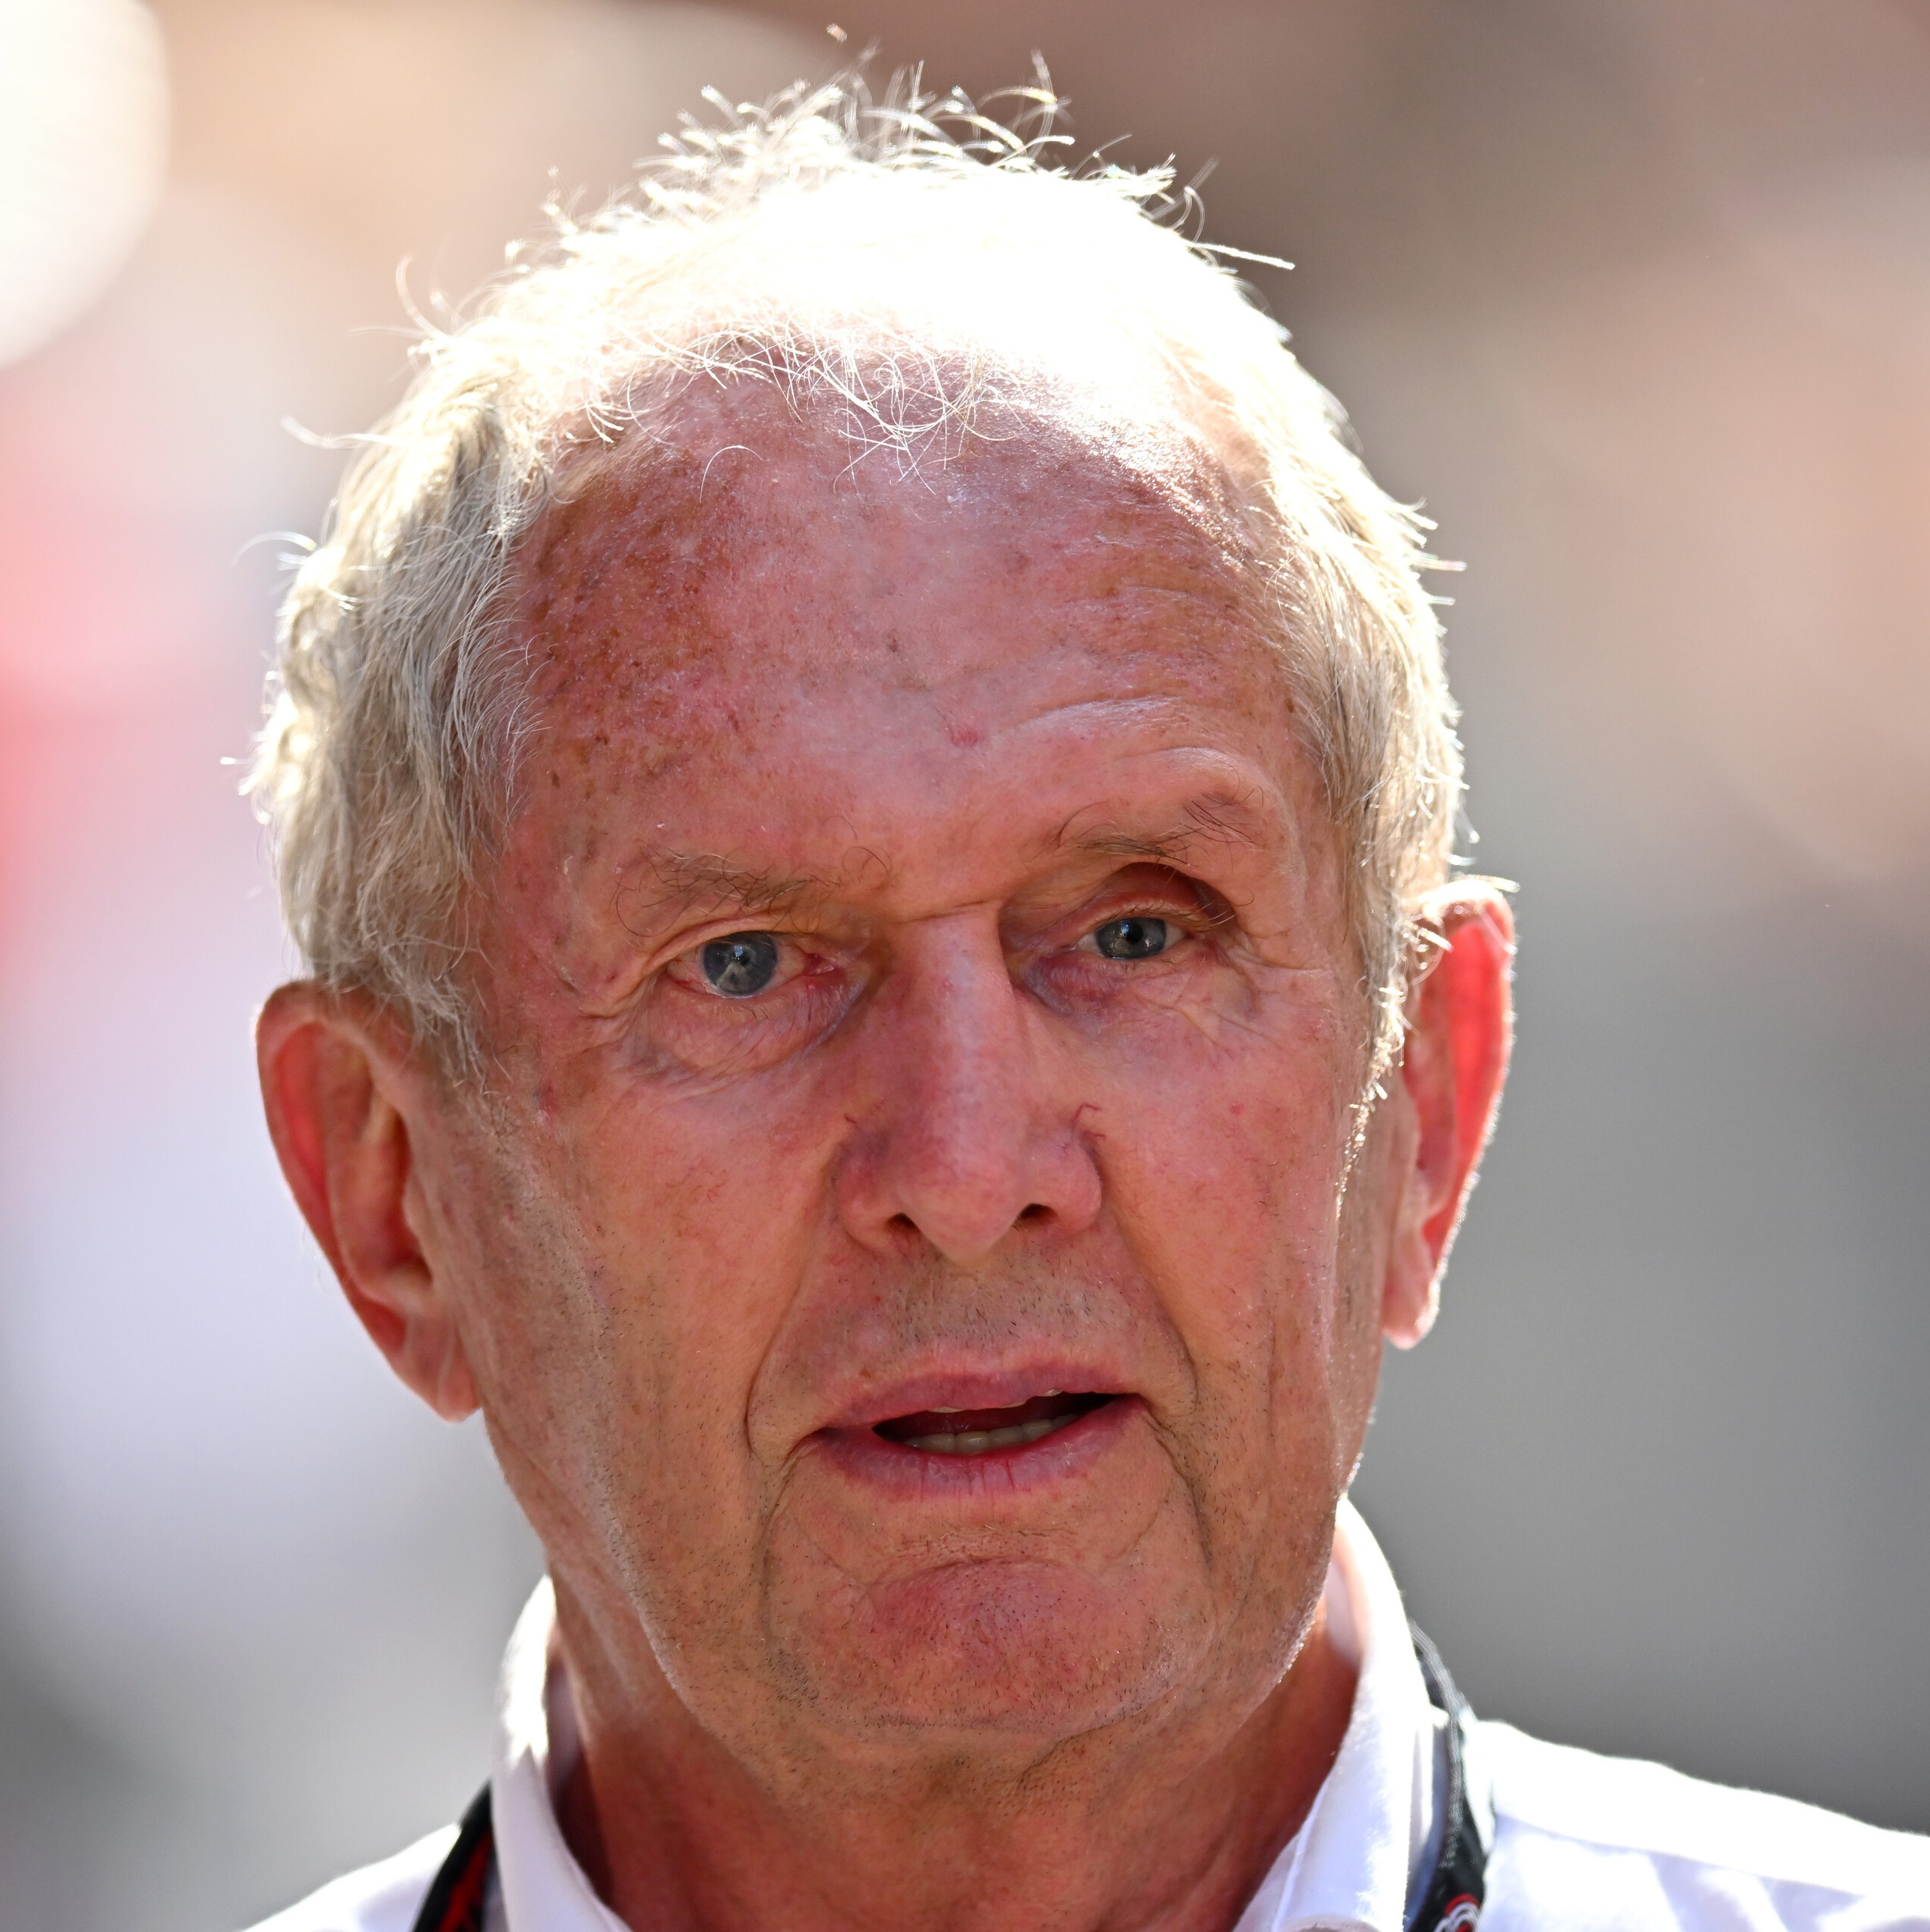 Interview with Helmut Marko - Exclusively on the Inside Line F1 Podcast